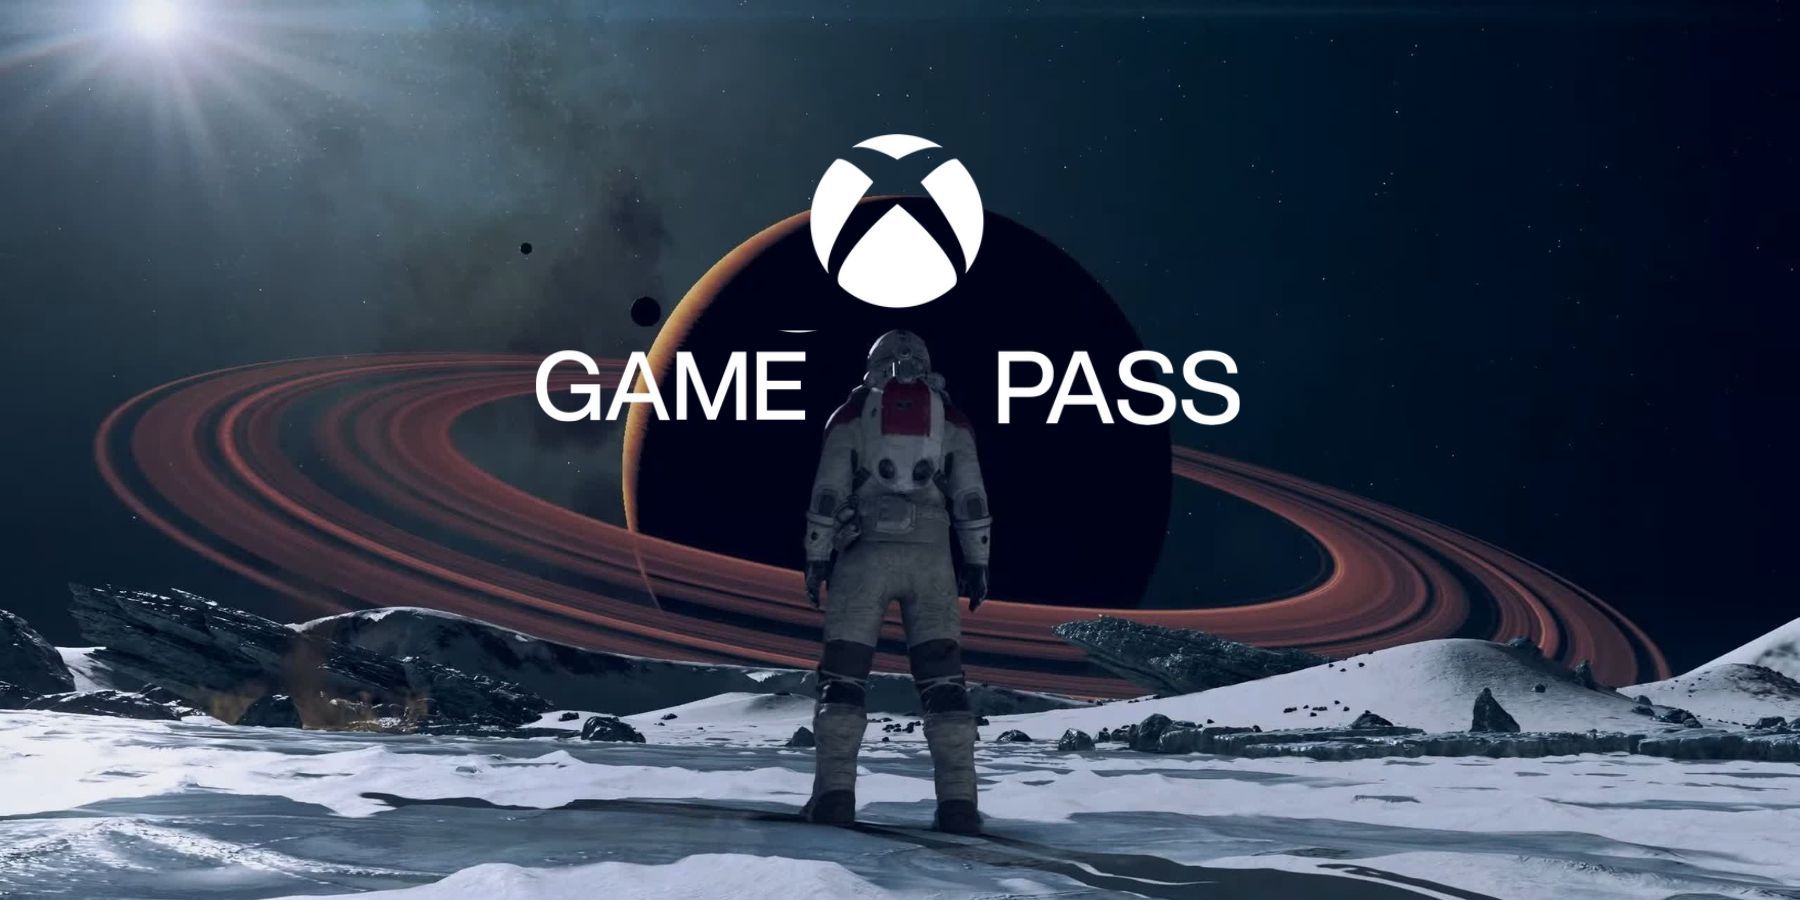 Microsoft ends $1 Xbox Game Pass promo ahead of Starfield's launch